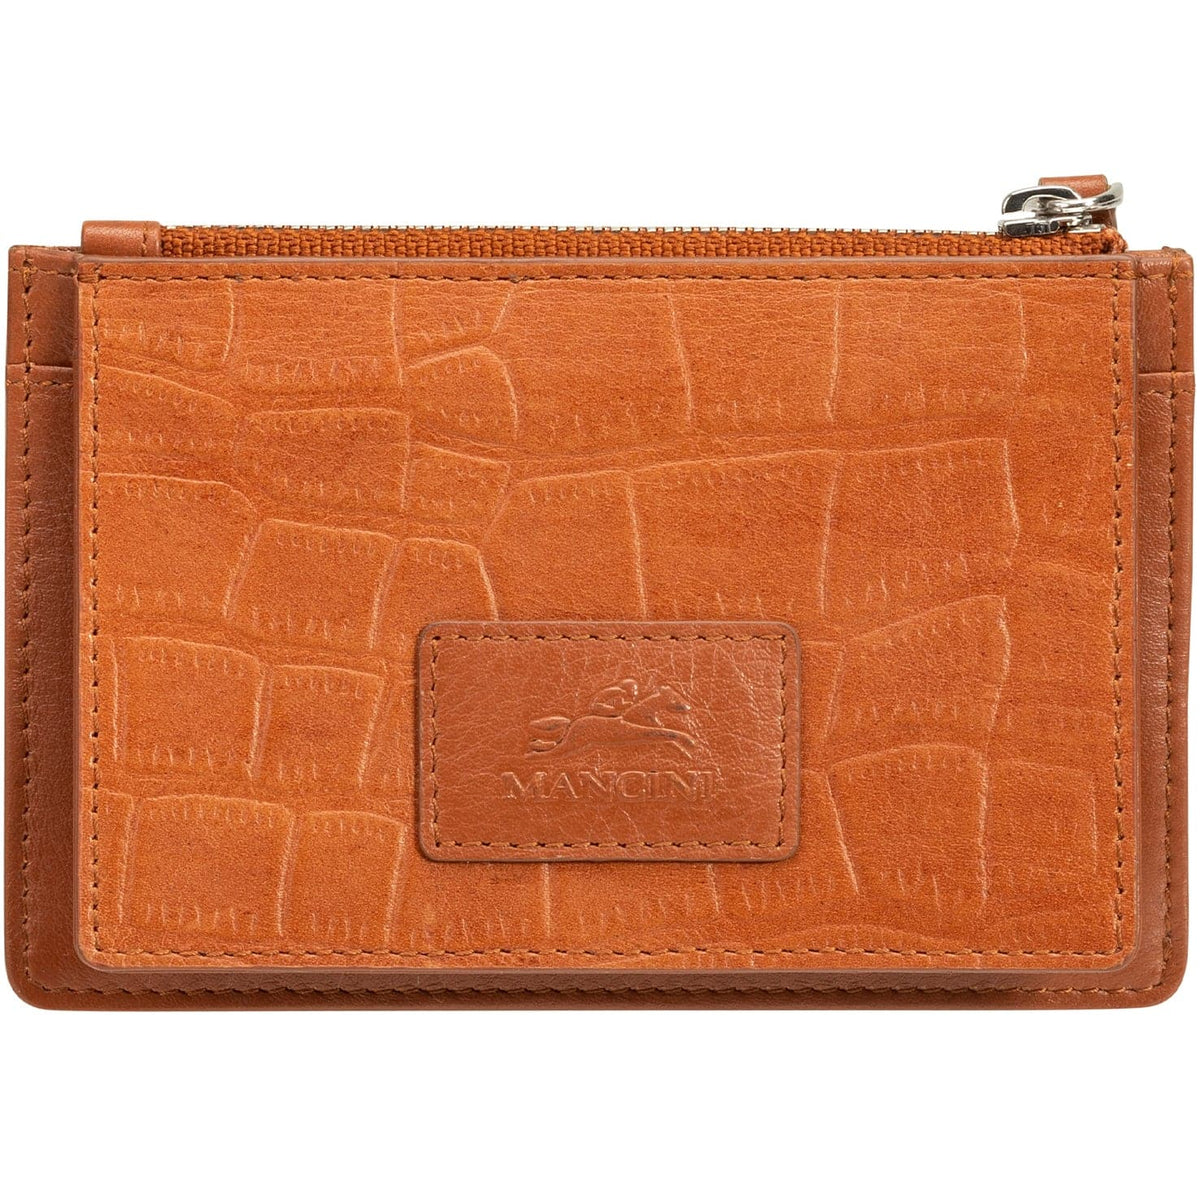 Mancini Croco RFID Secure Card Case and Coin Pocket